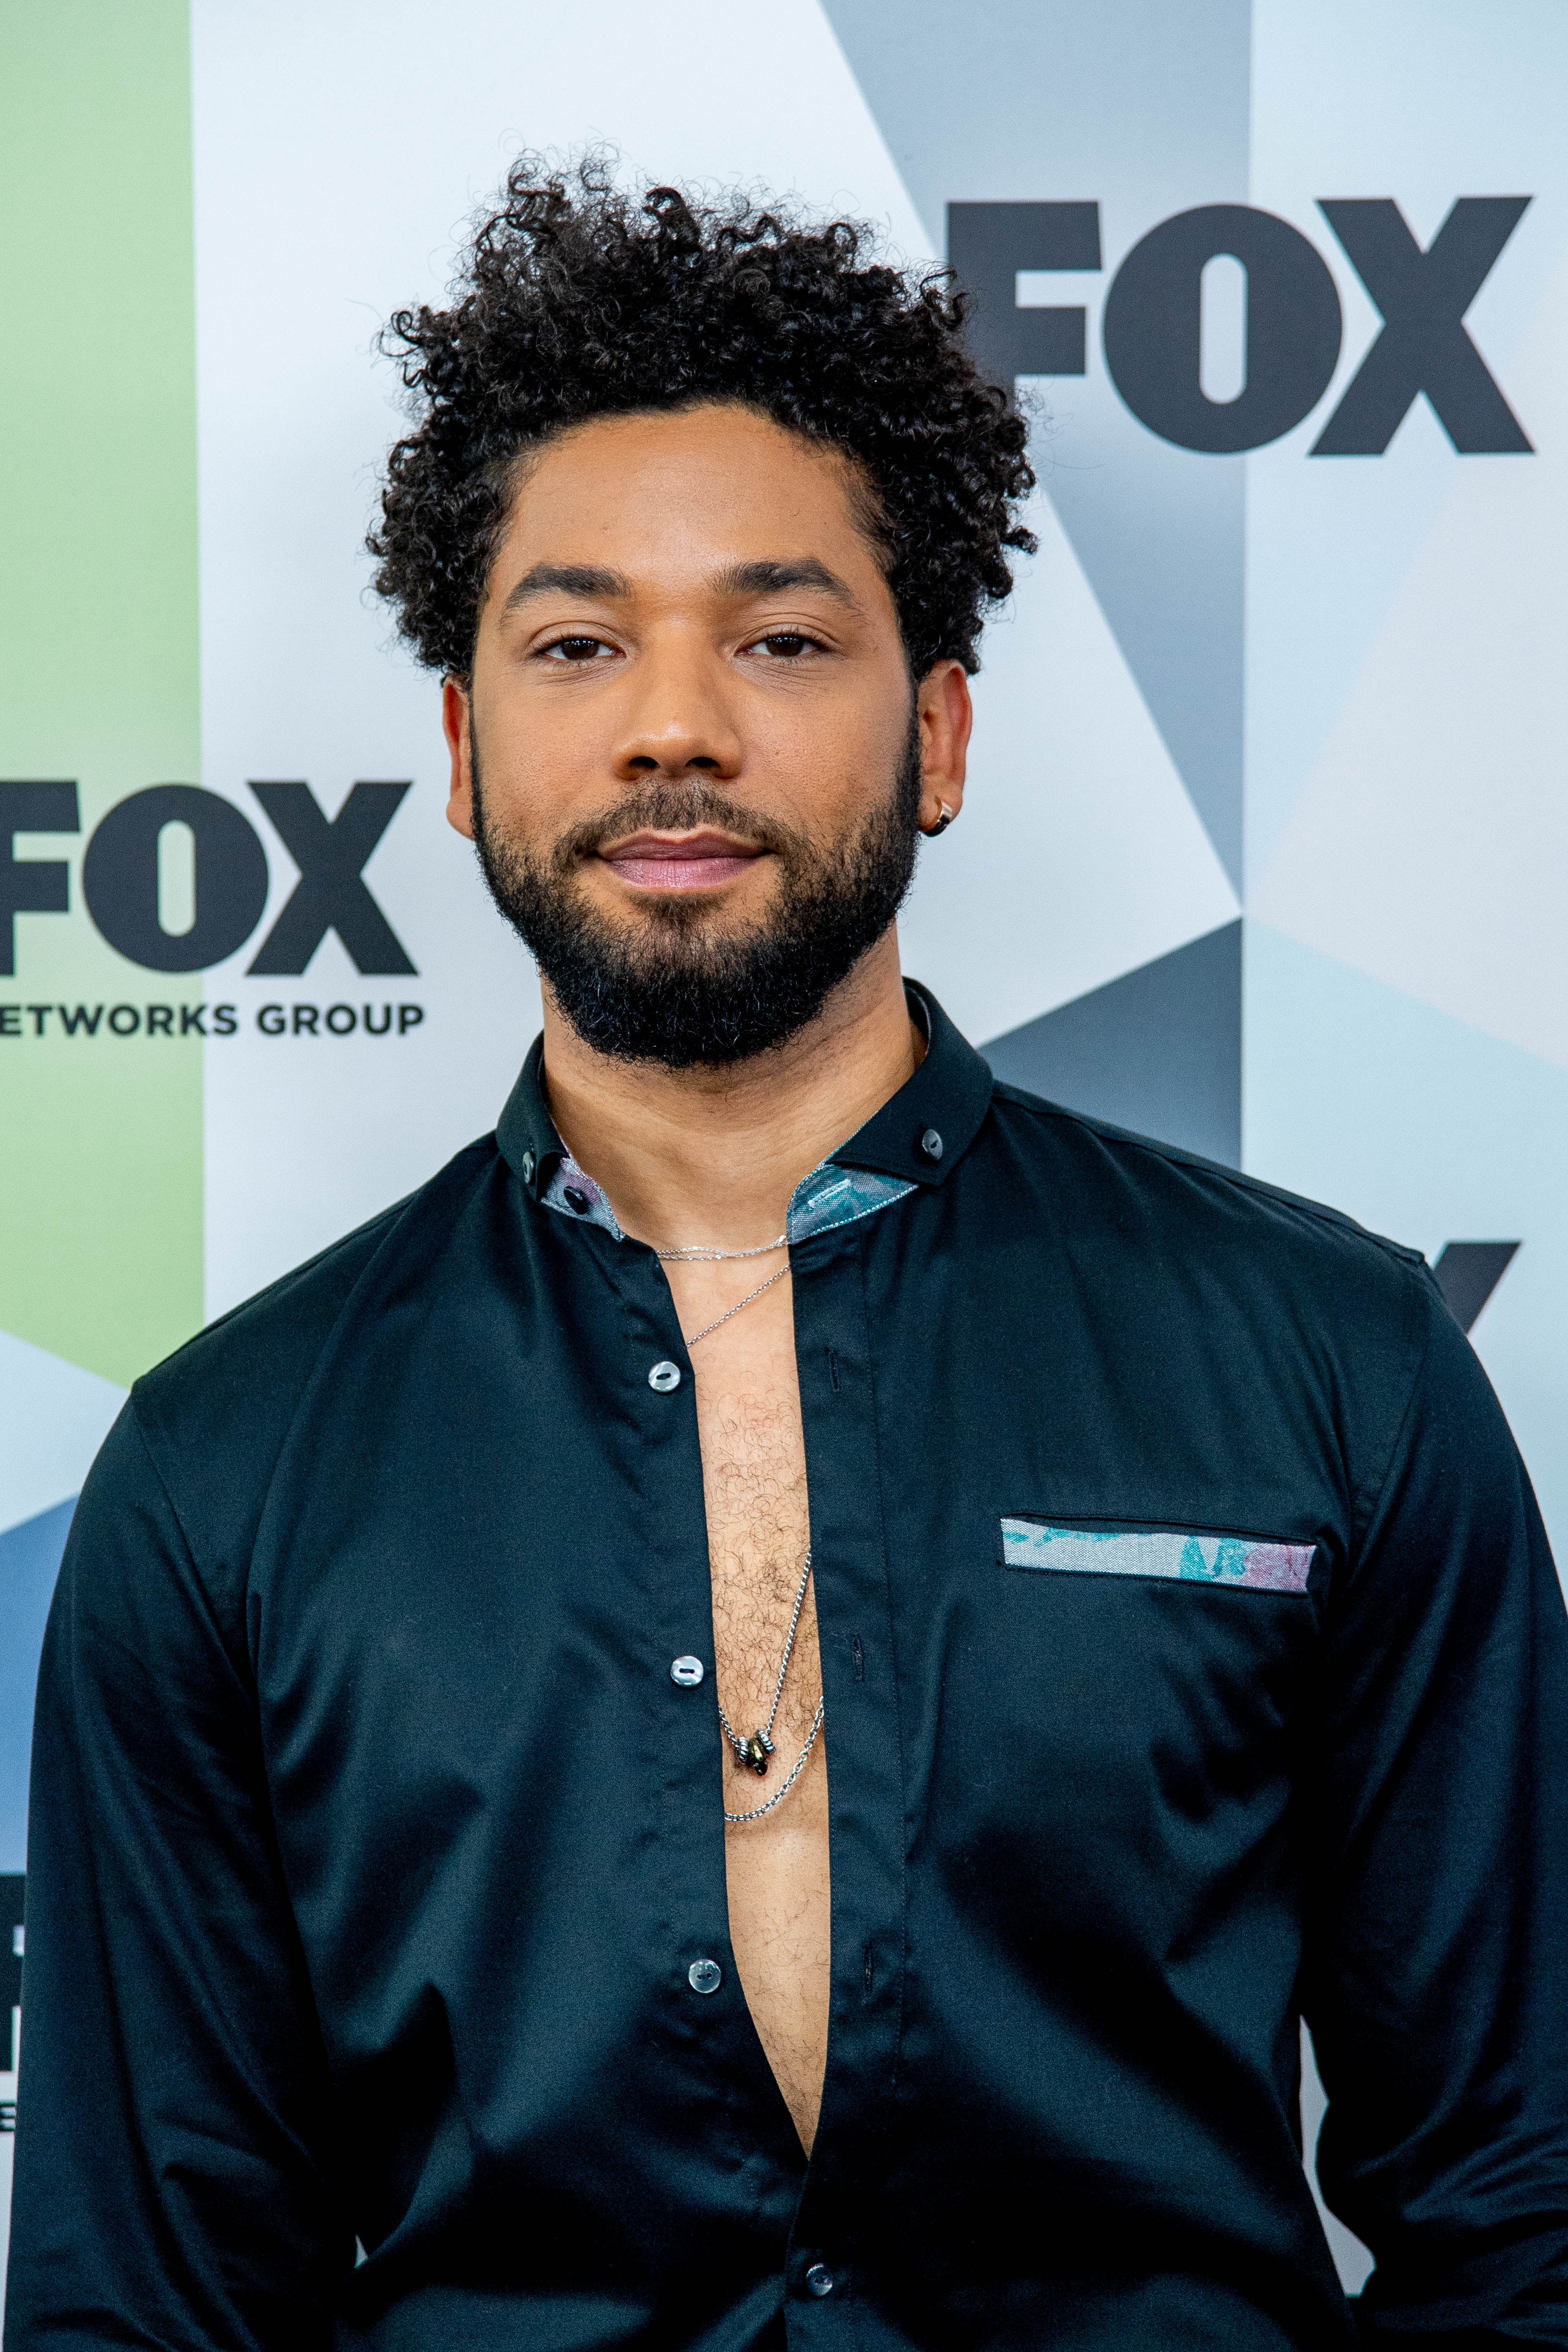 Jussie Smollett at a Fox event in May 2018 in New York. | Photo: Getty Images